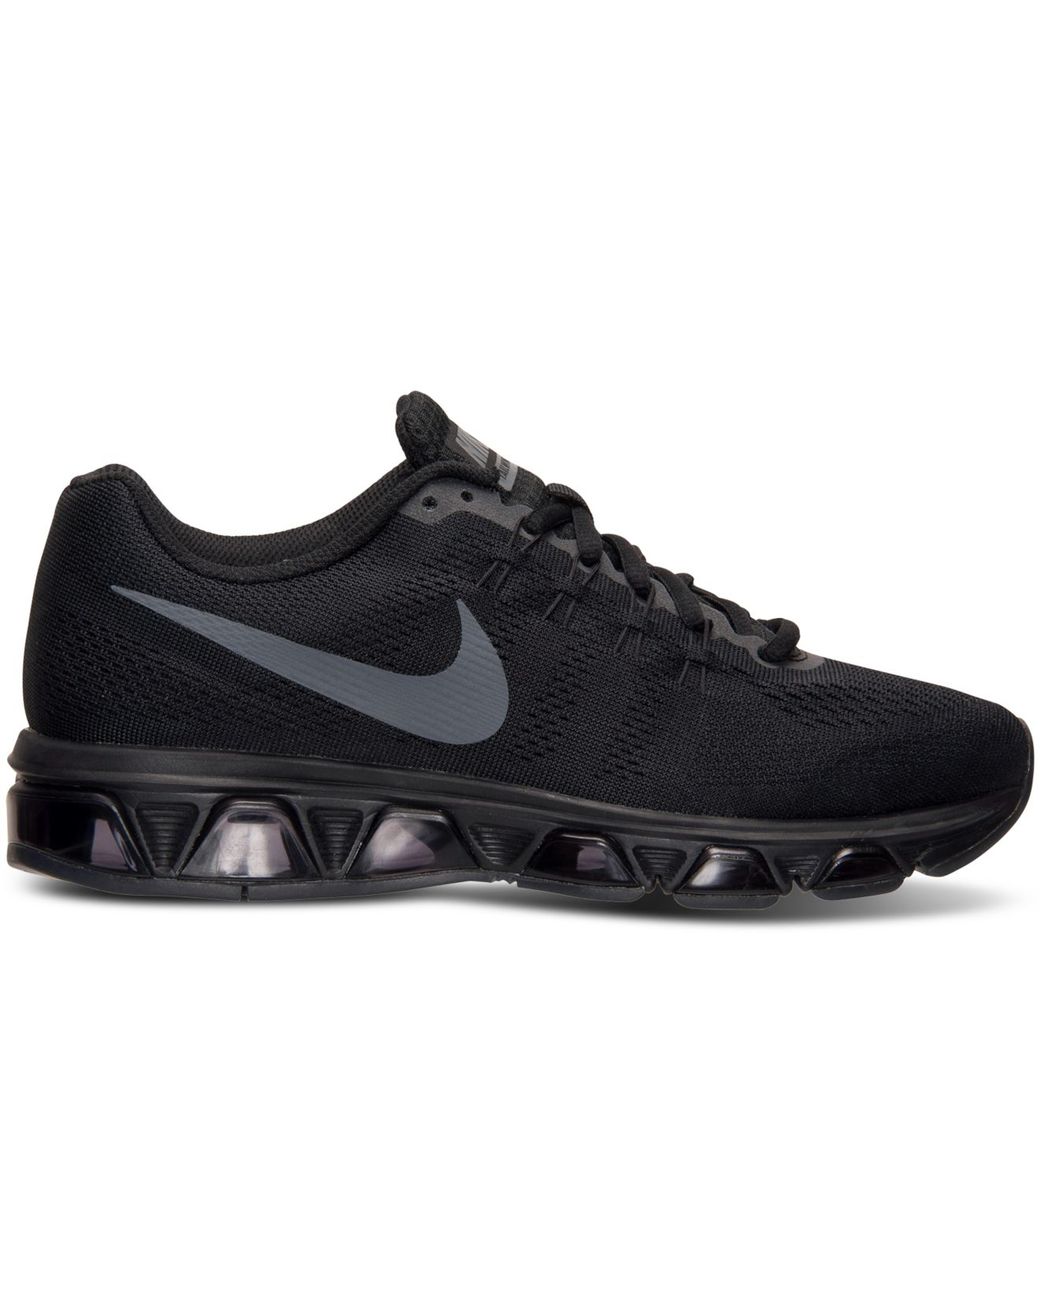 Nike Air Max Tailwind Caracteristicas | vlr.eng.br